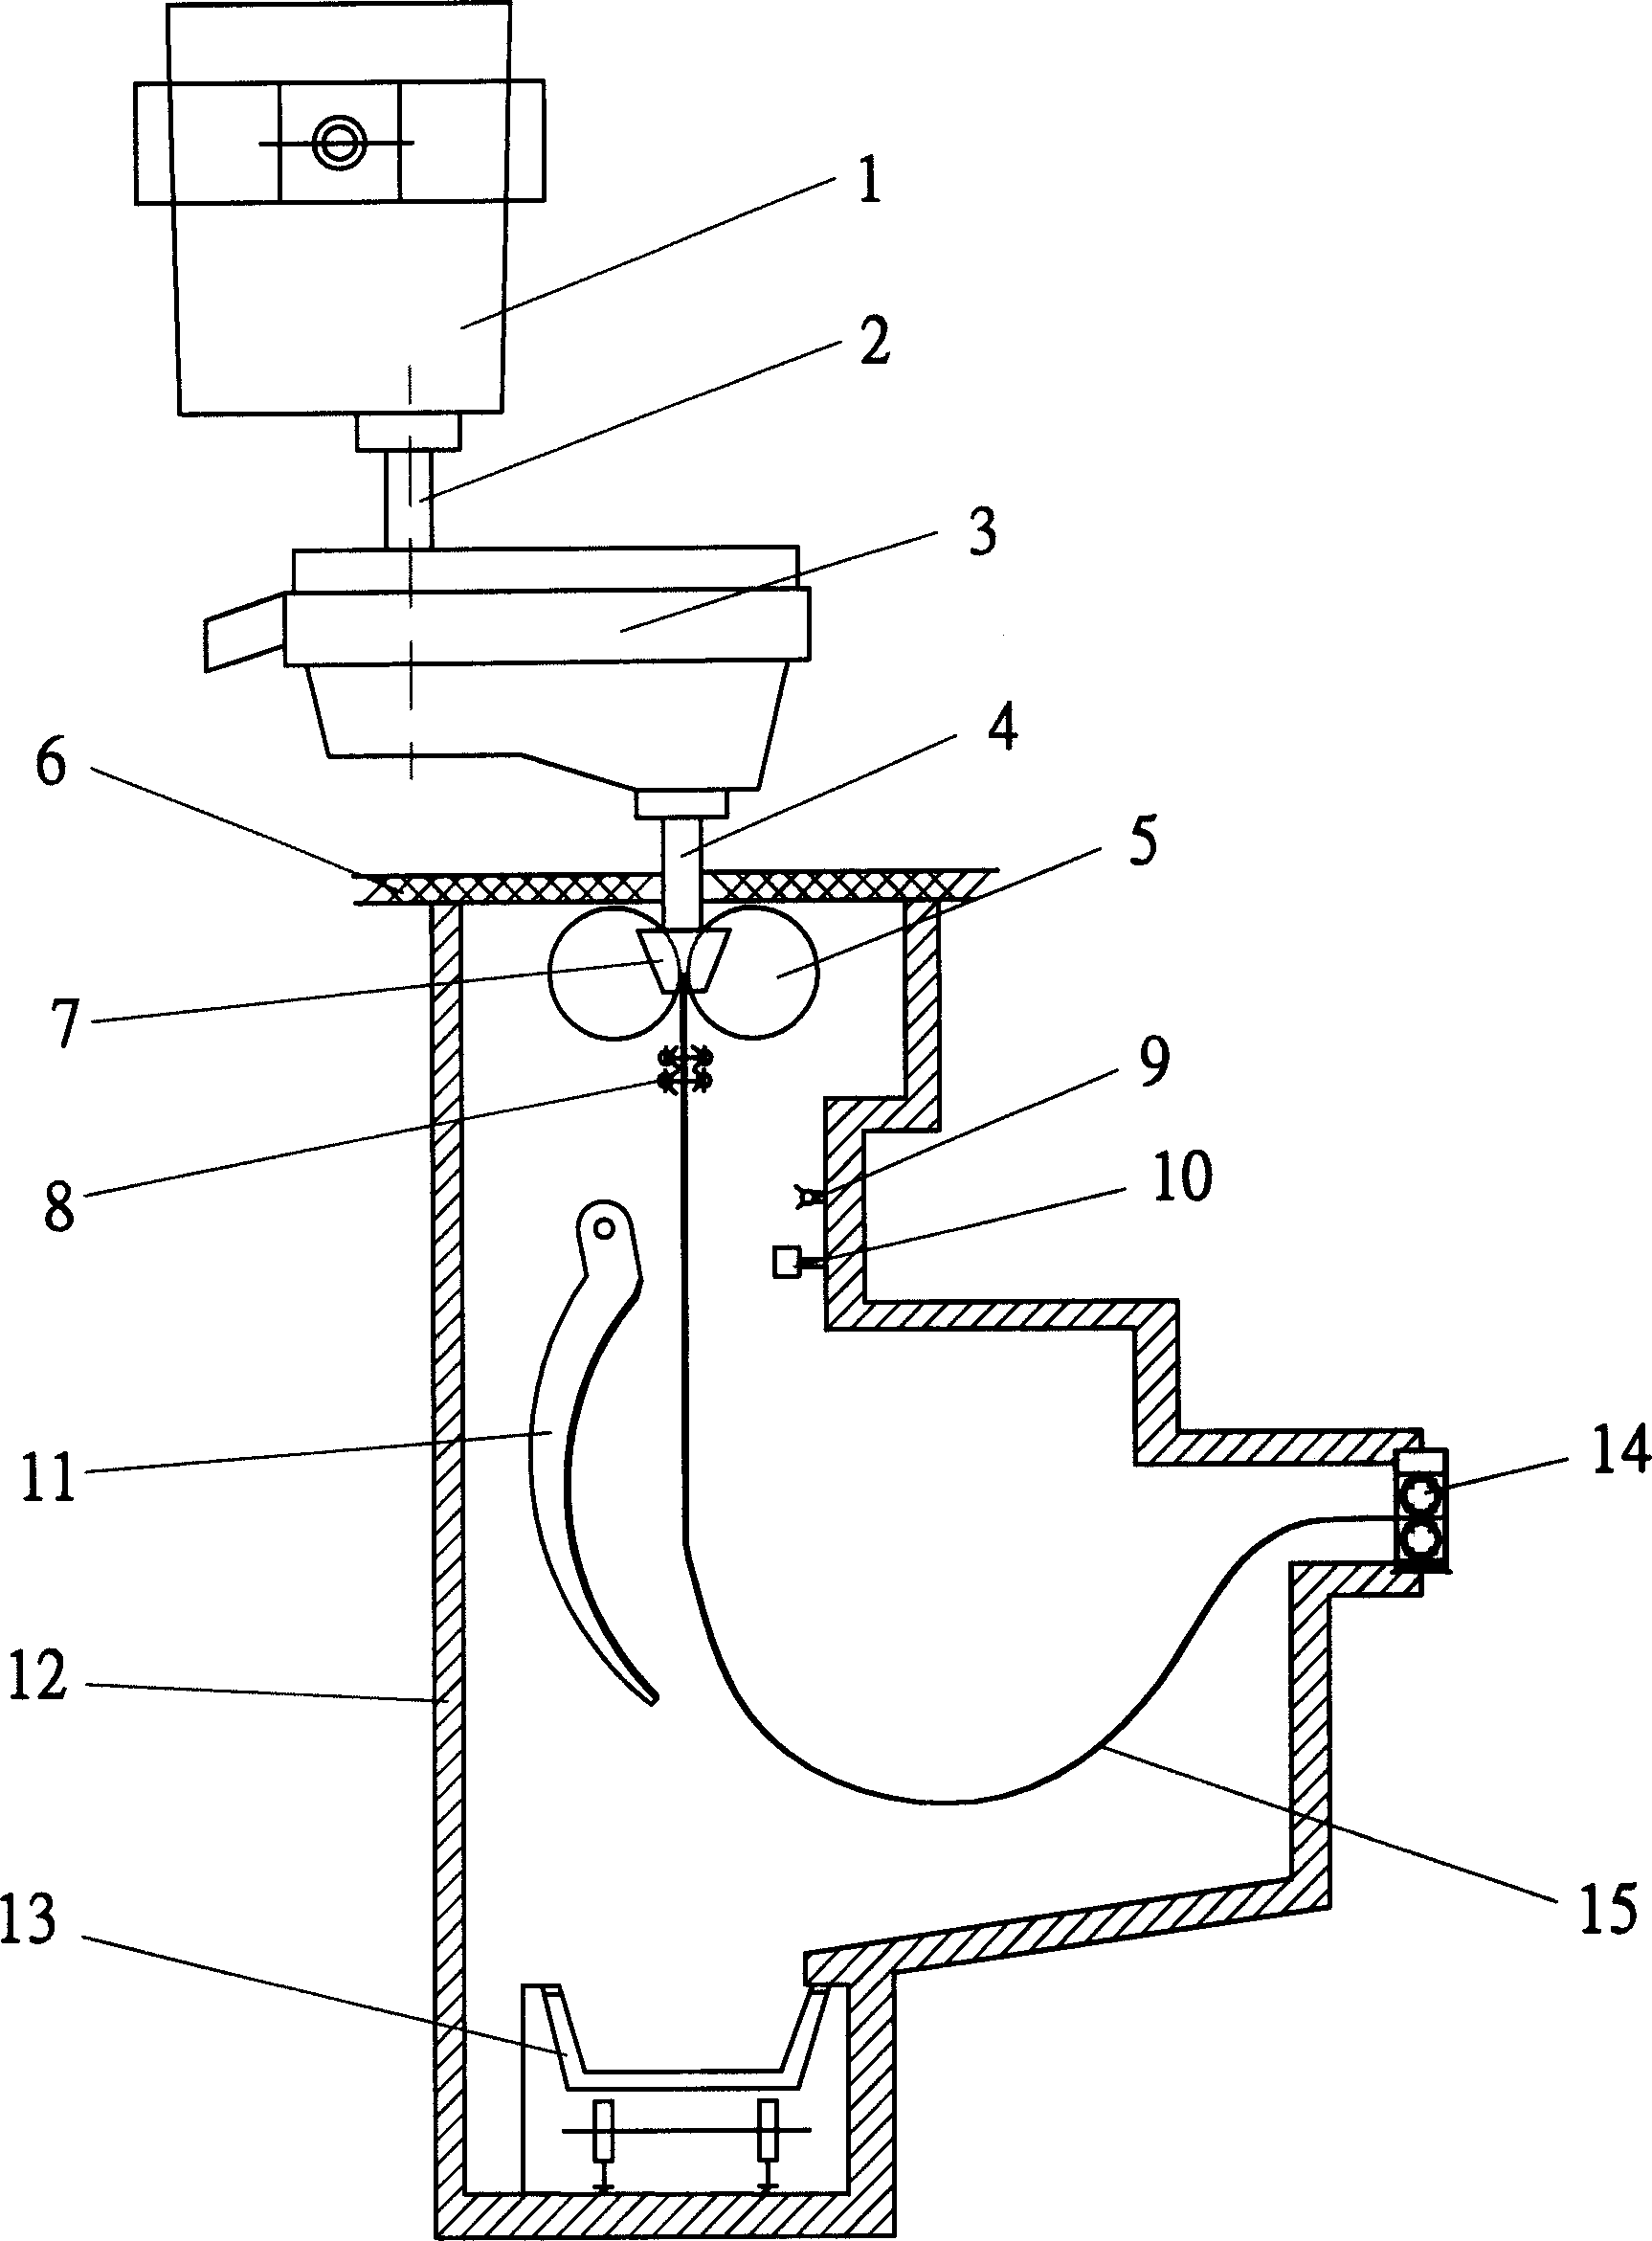 Thin-belt continuous casting method and apparatus